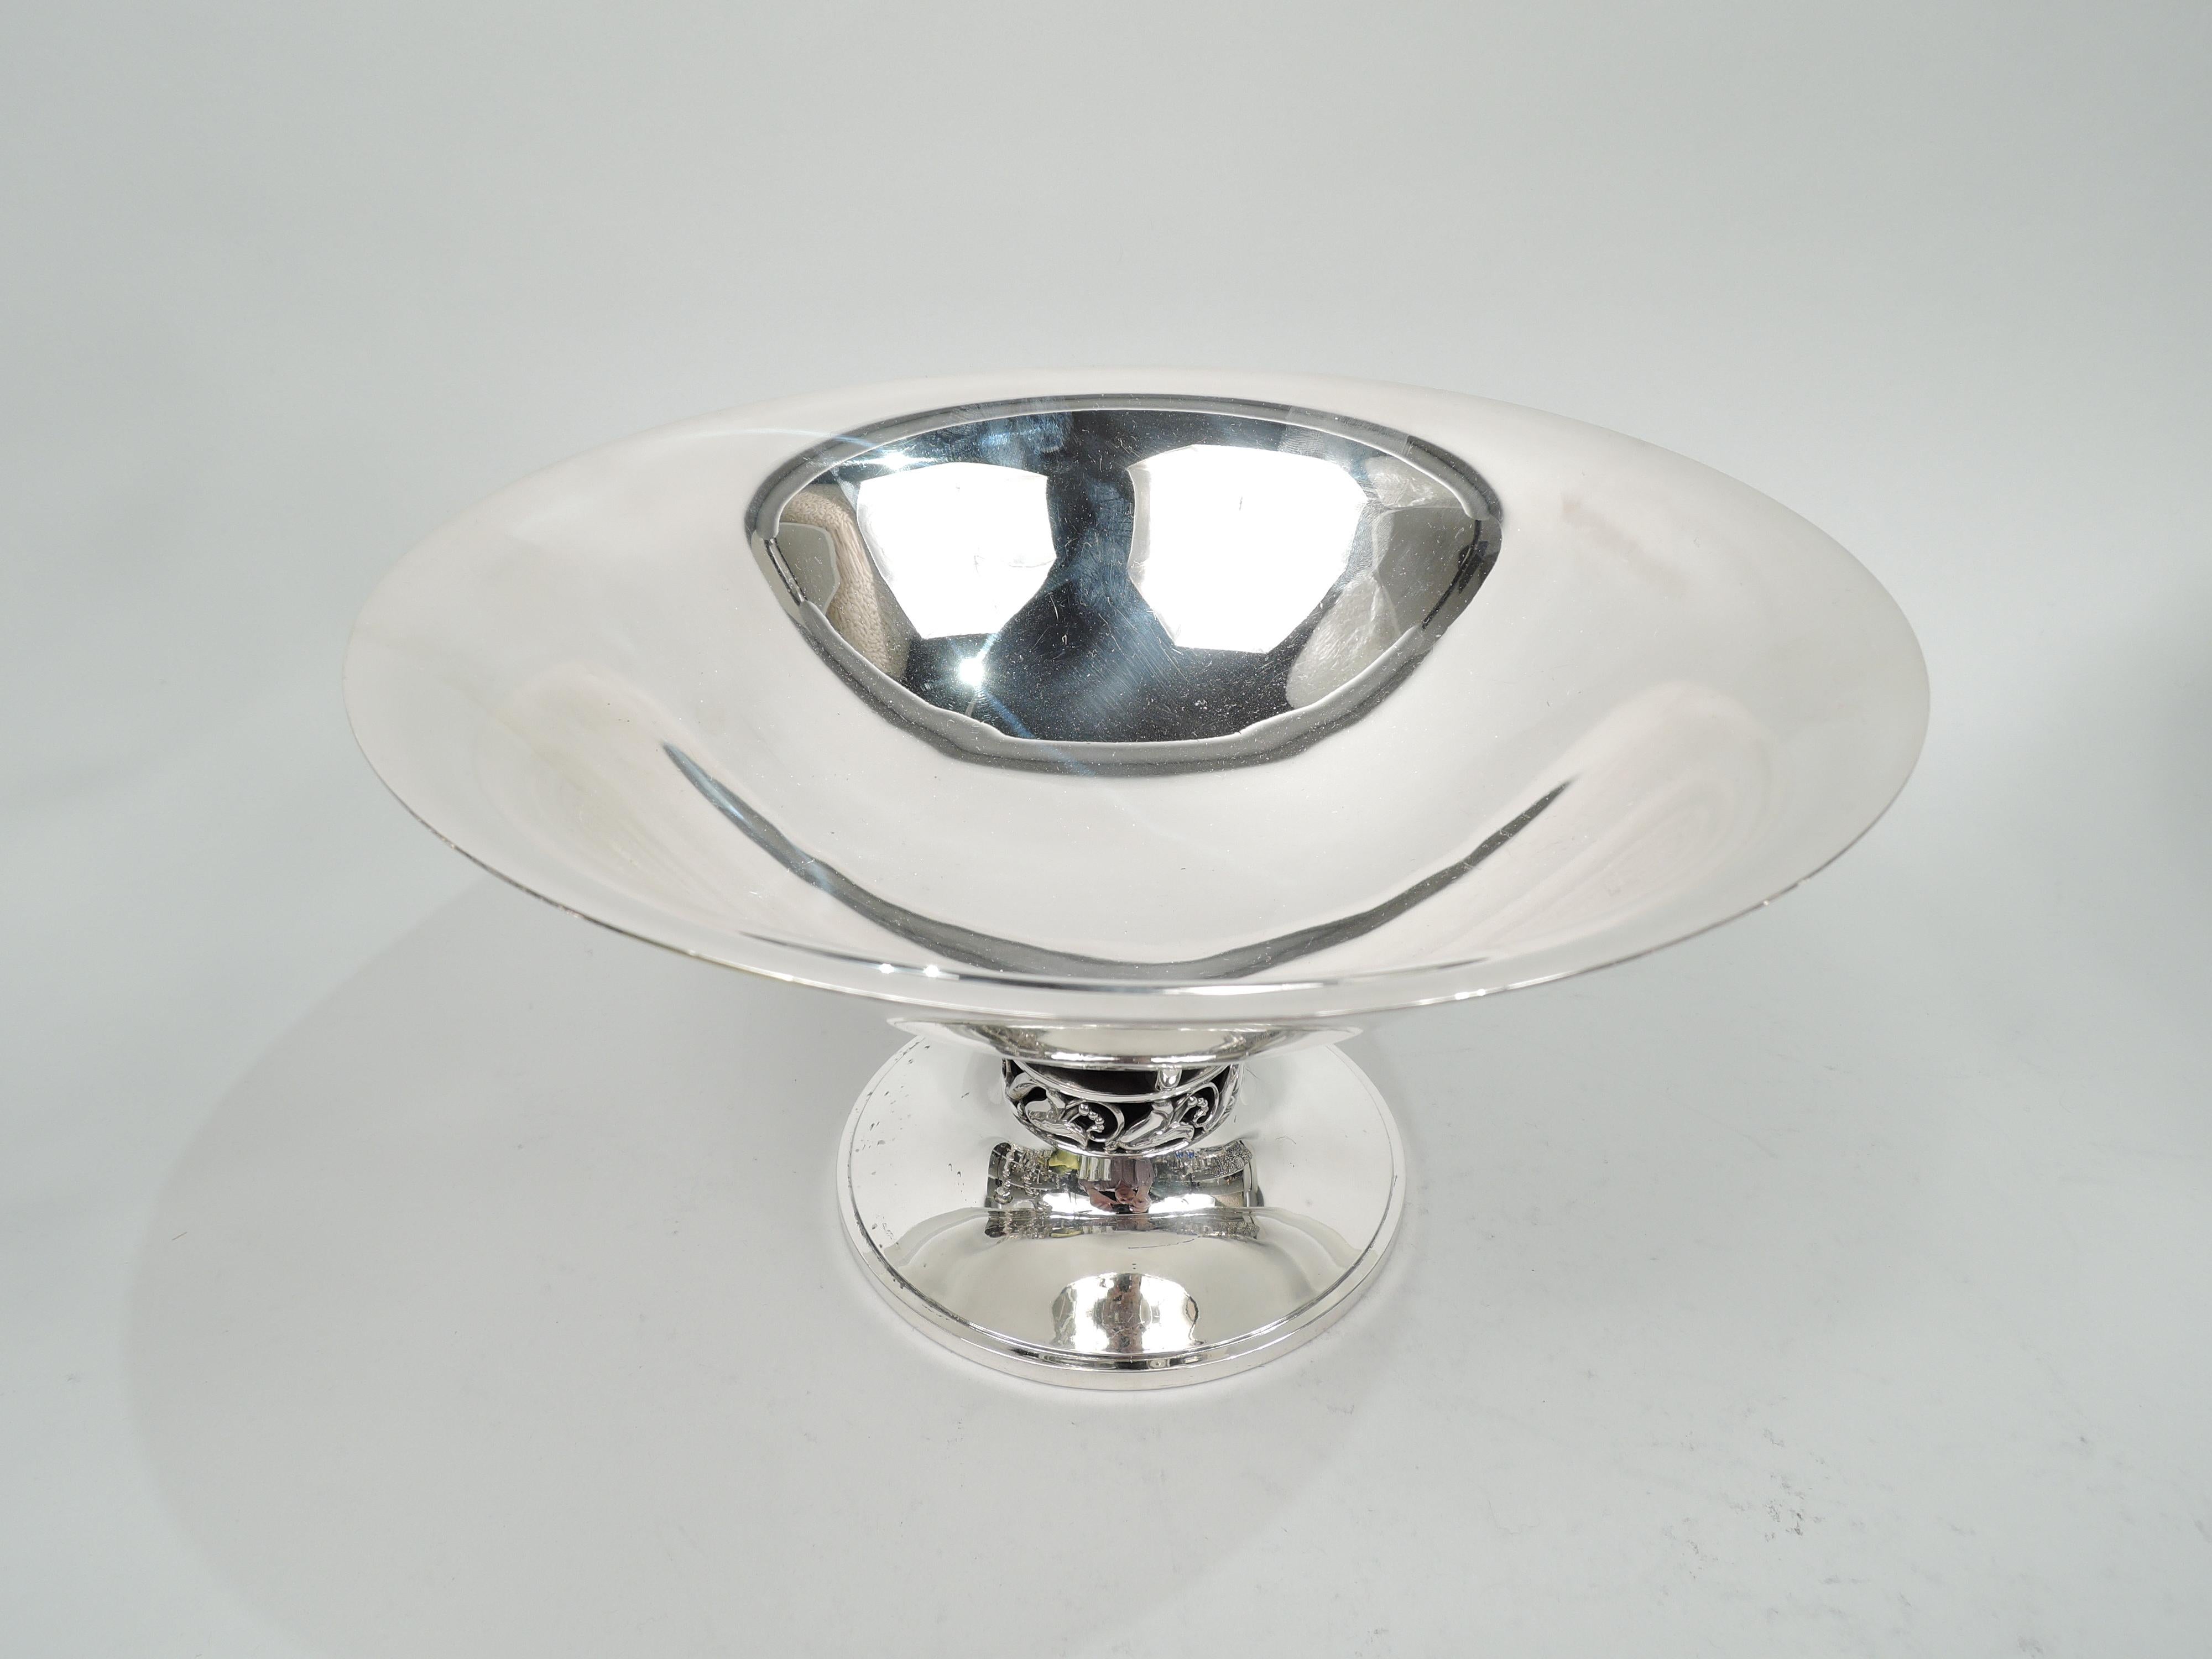 Mid-Century Modern sterling silver compote. Designed by Alphonse La Paglia (d. 1953) for International Silver Co. in Meriden, Conn. Bowl has wide mouth with flared rim and curved and tapering support. Short support comprising alternating rings and